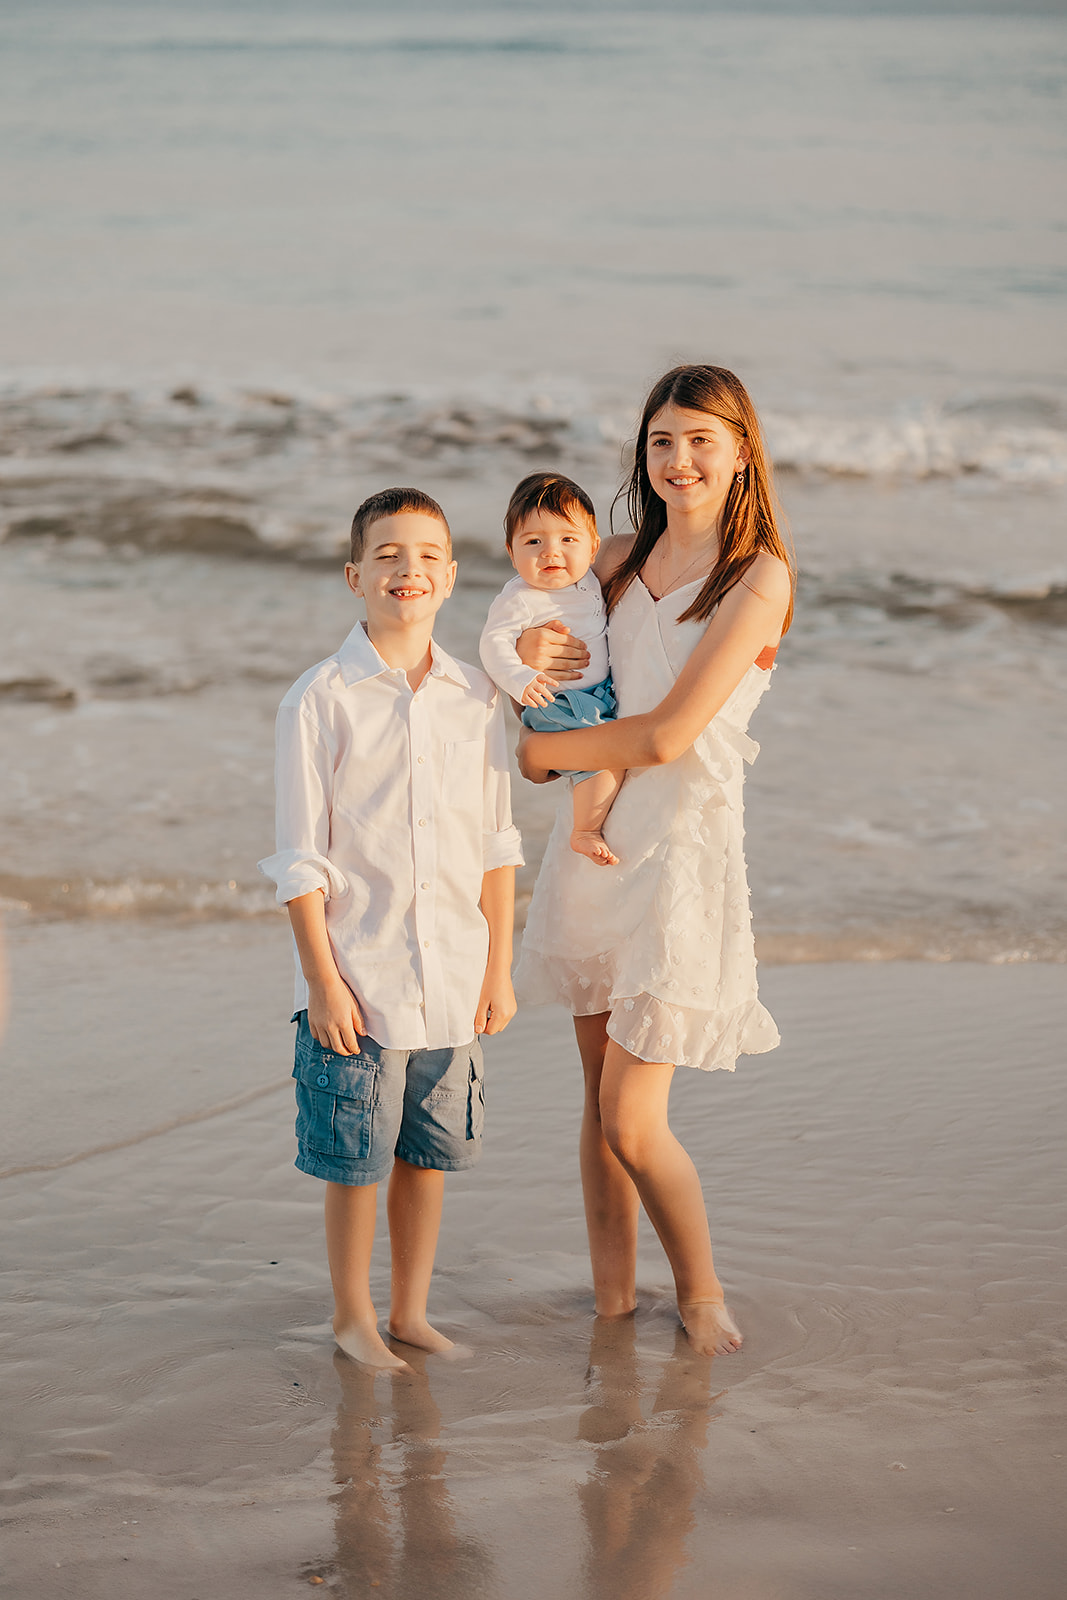 Beach Family Photoshoot in Orange Beach - Family group photo with water and rocks in the background